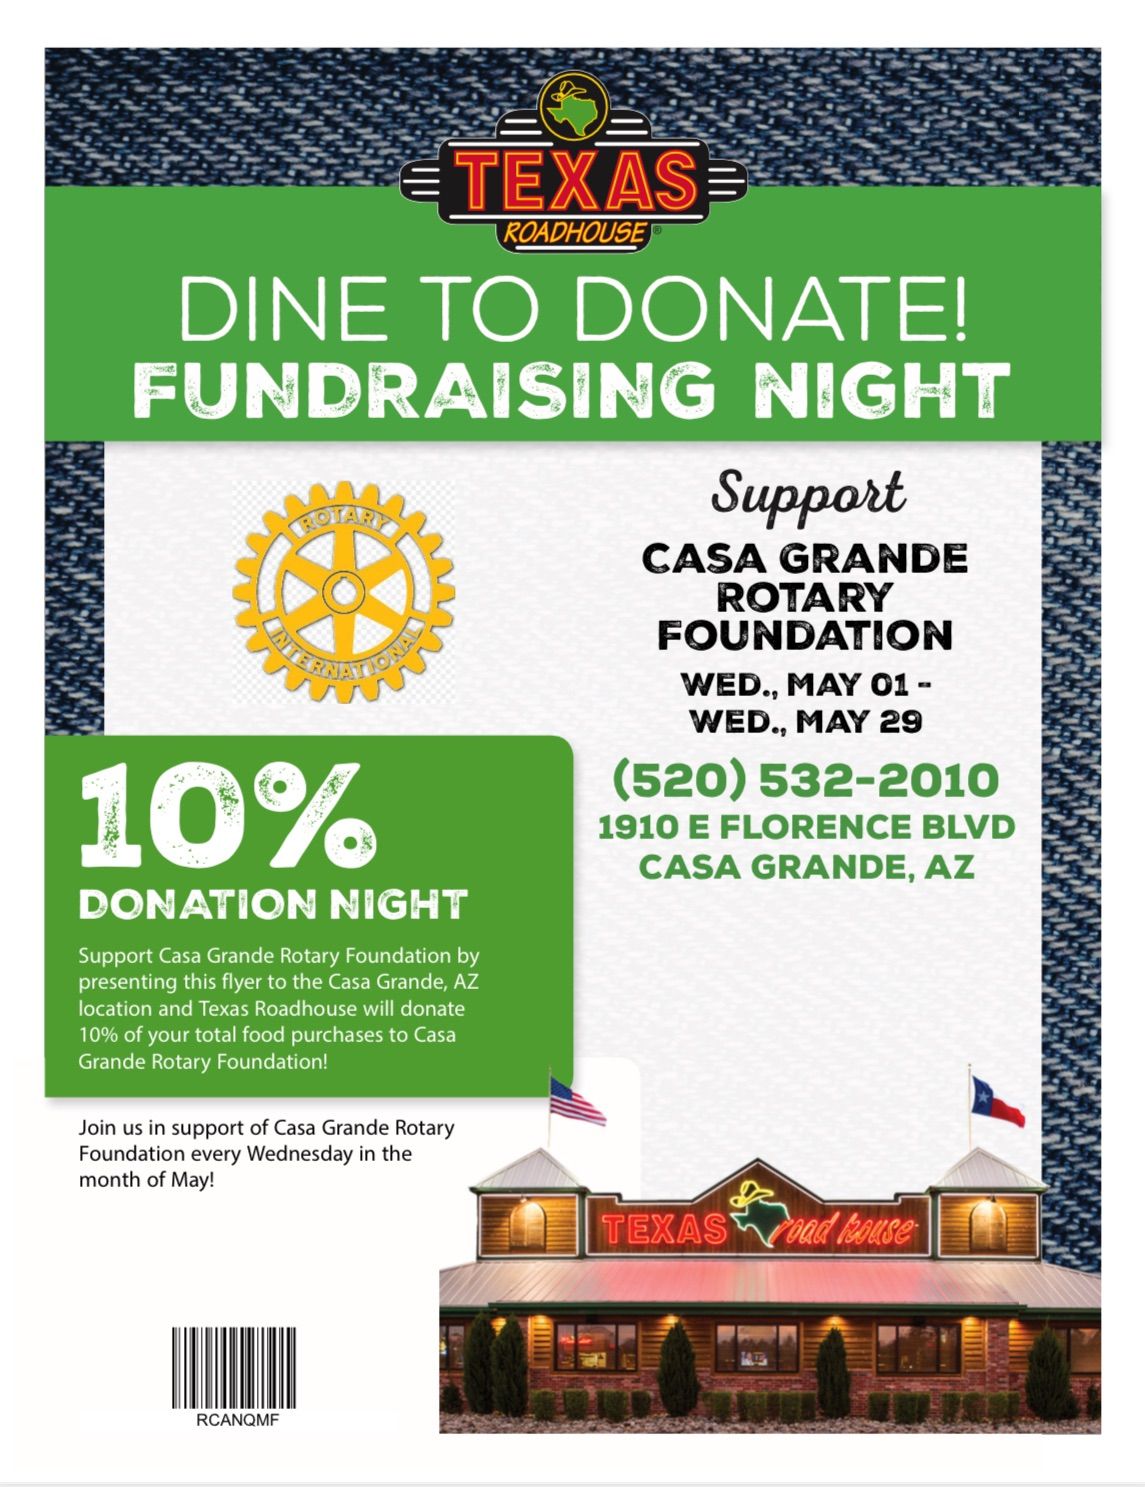 Dine to Donate! Fundraising Nights